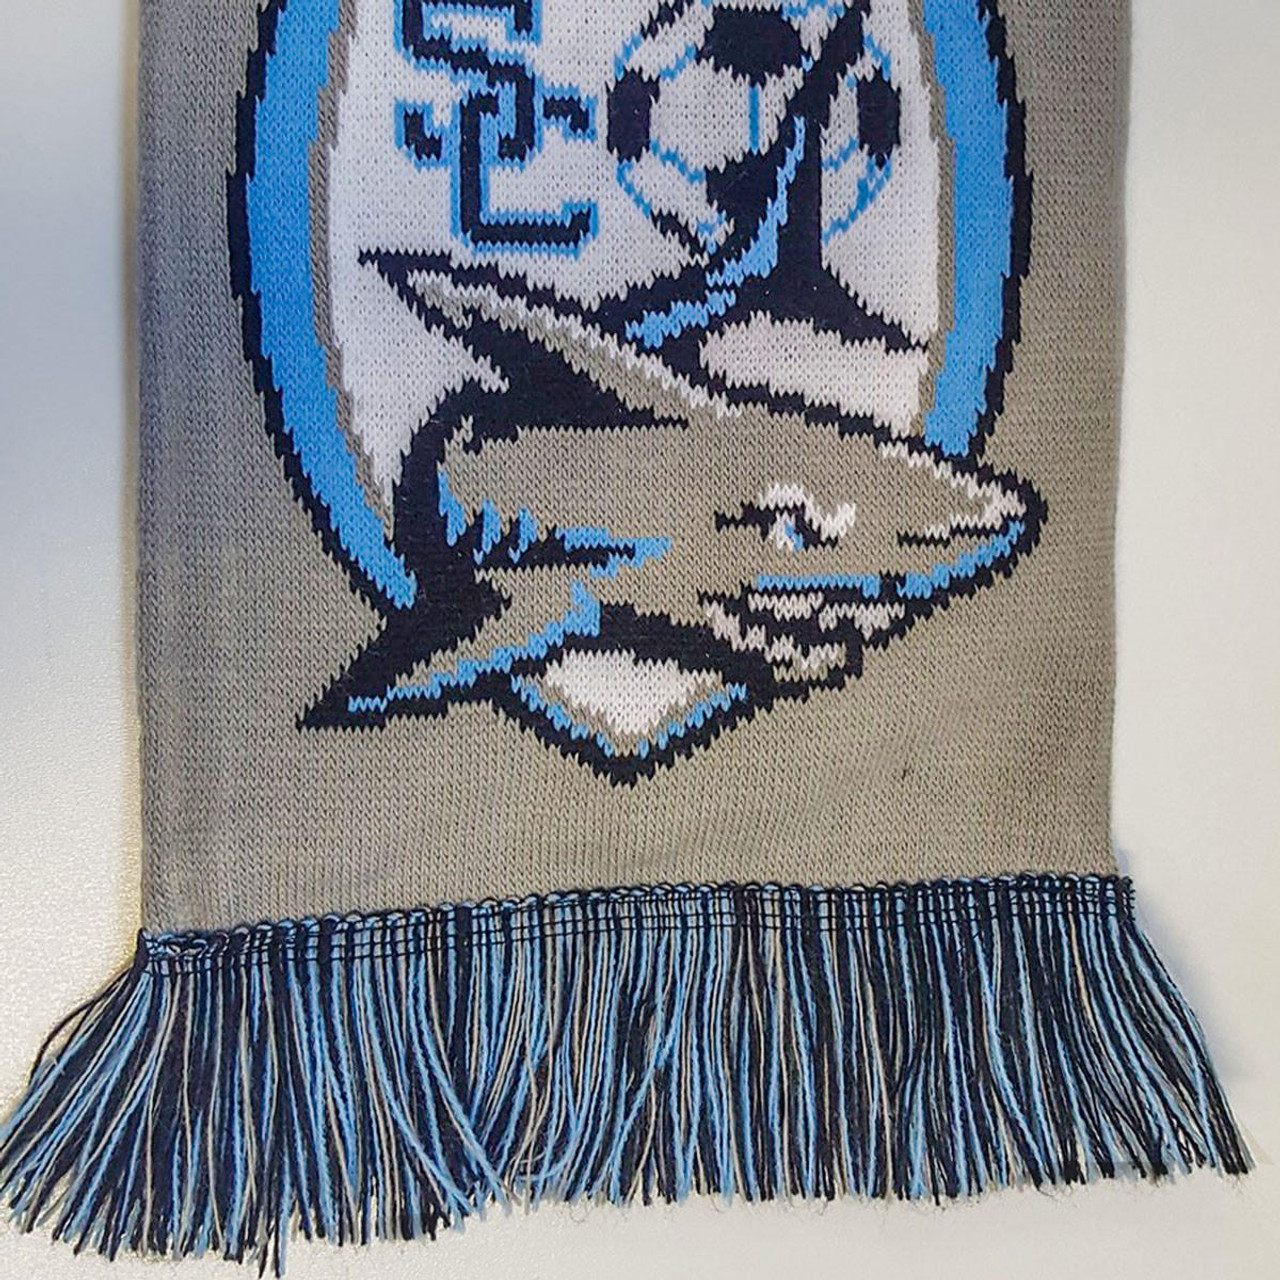 make your own soccer scarf